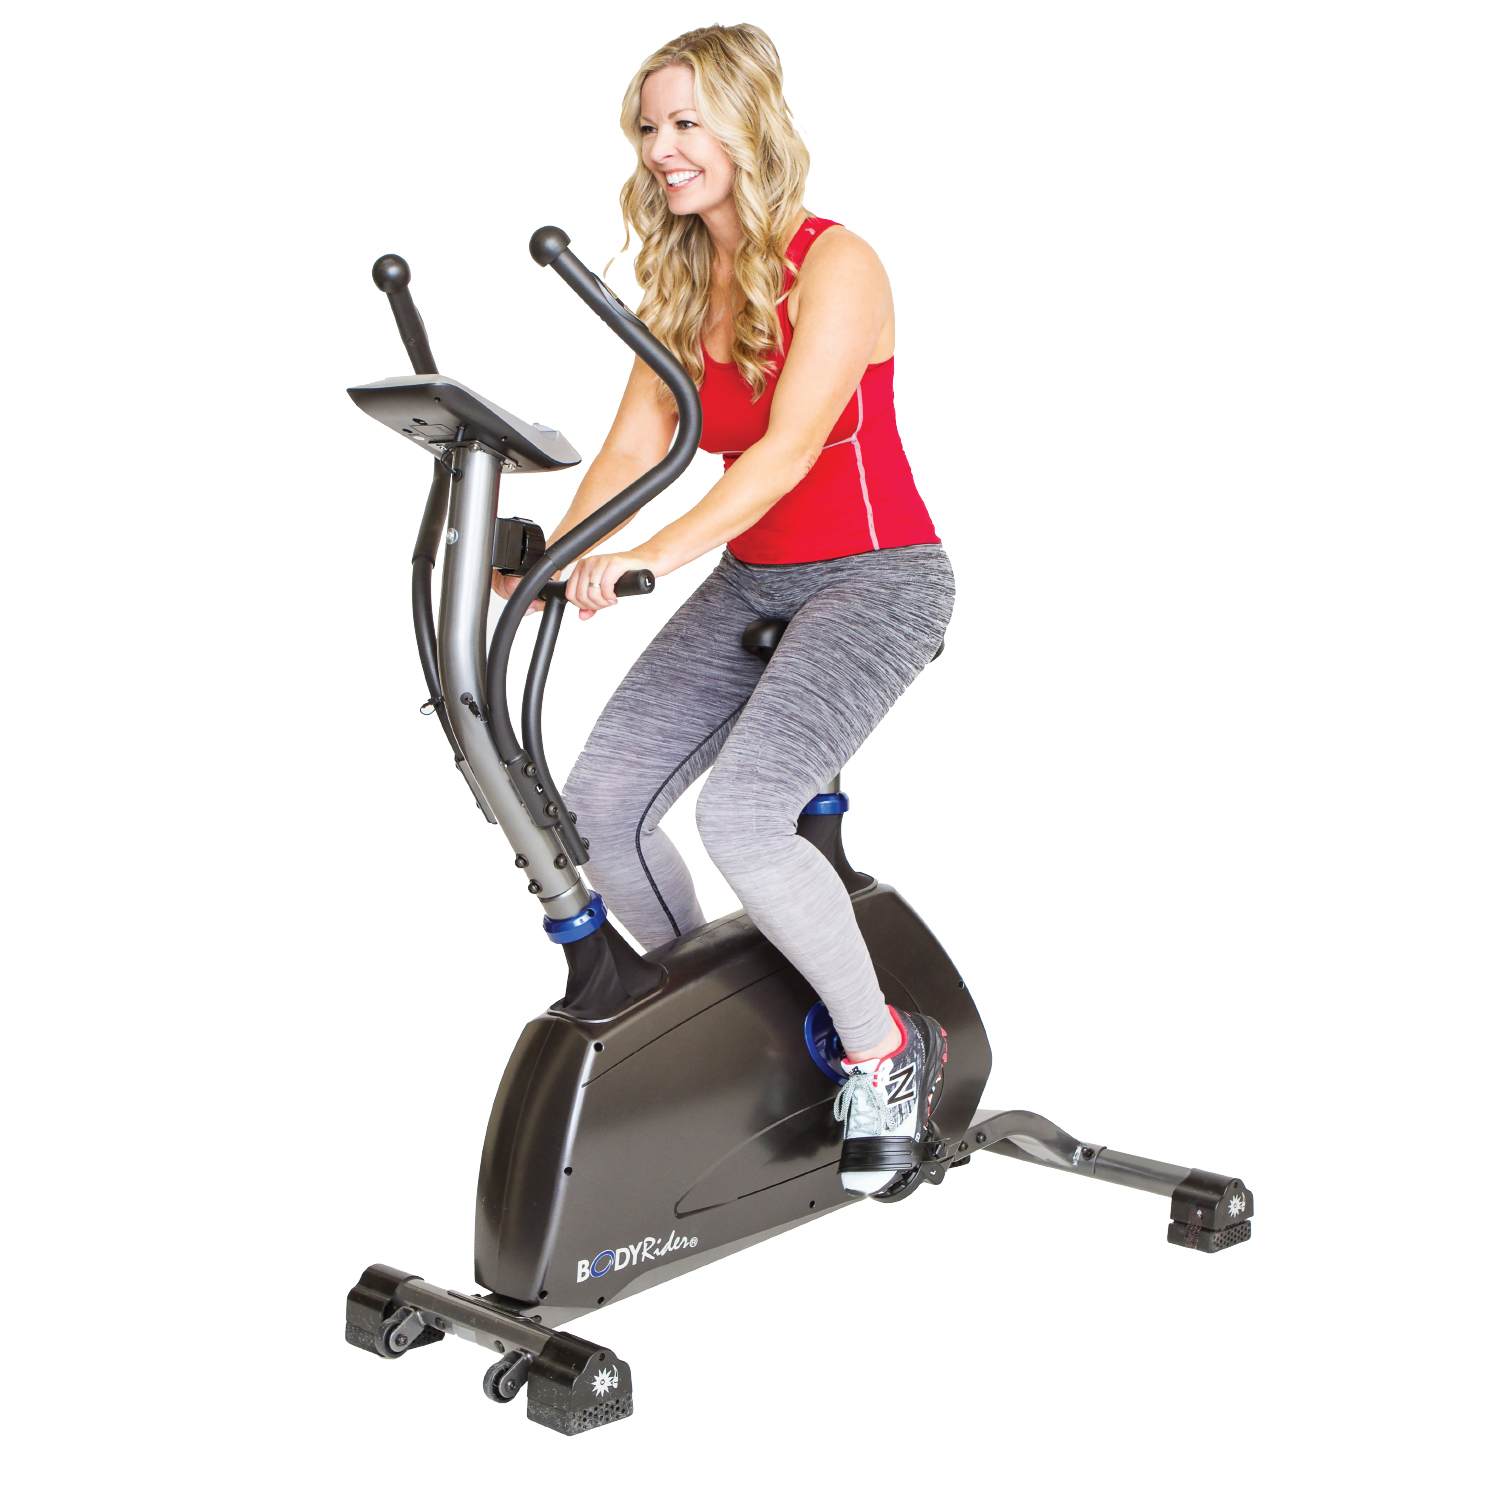 The Body Rider HBR35 Core & Cardio Workout Ab & Thigh Exercise Gallop Workout Trainer Machine - image 1 of 2